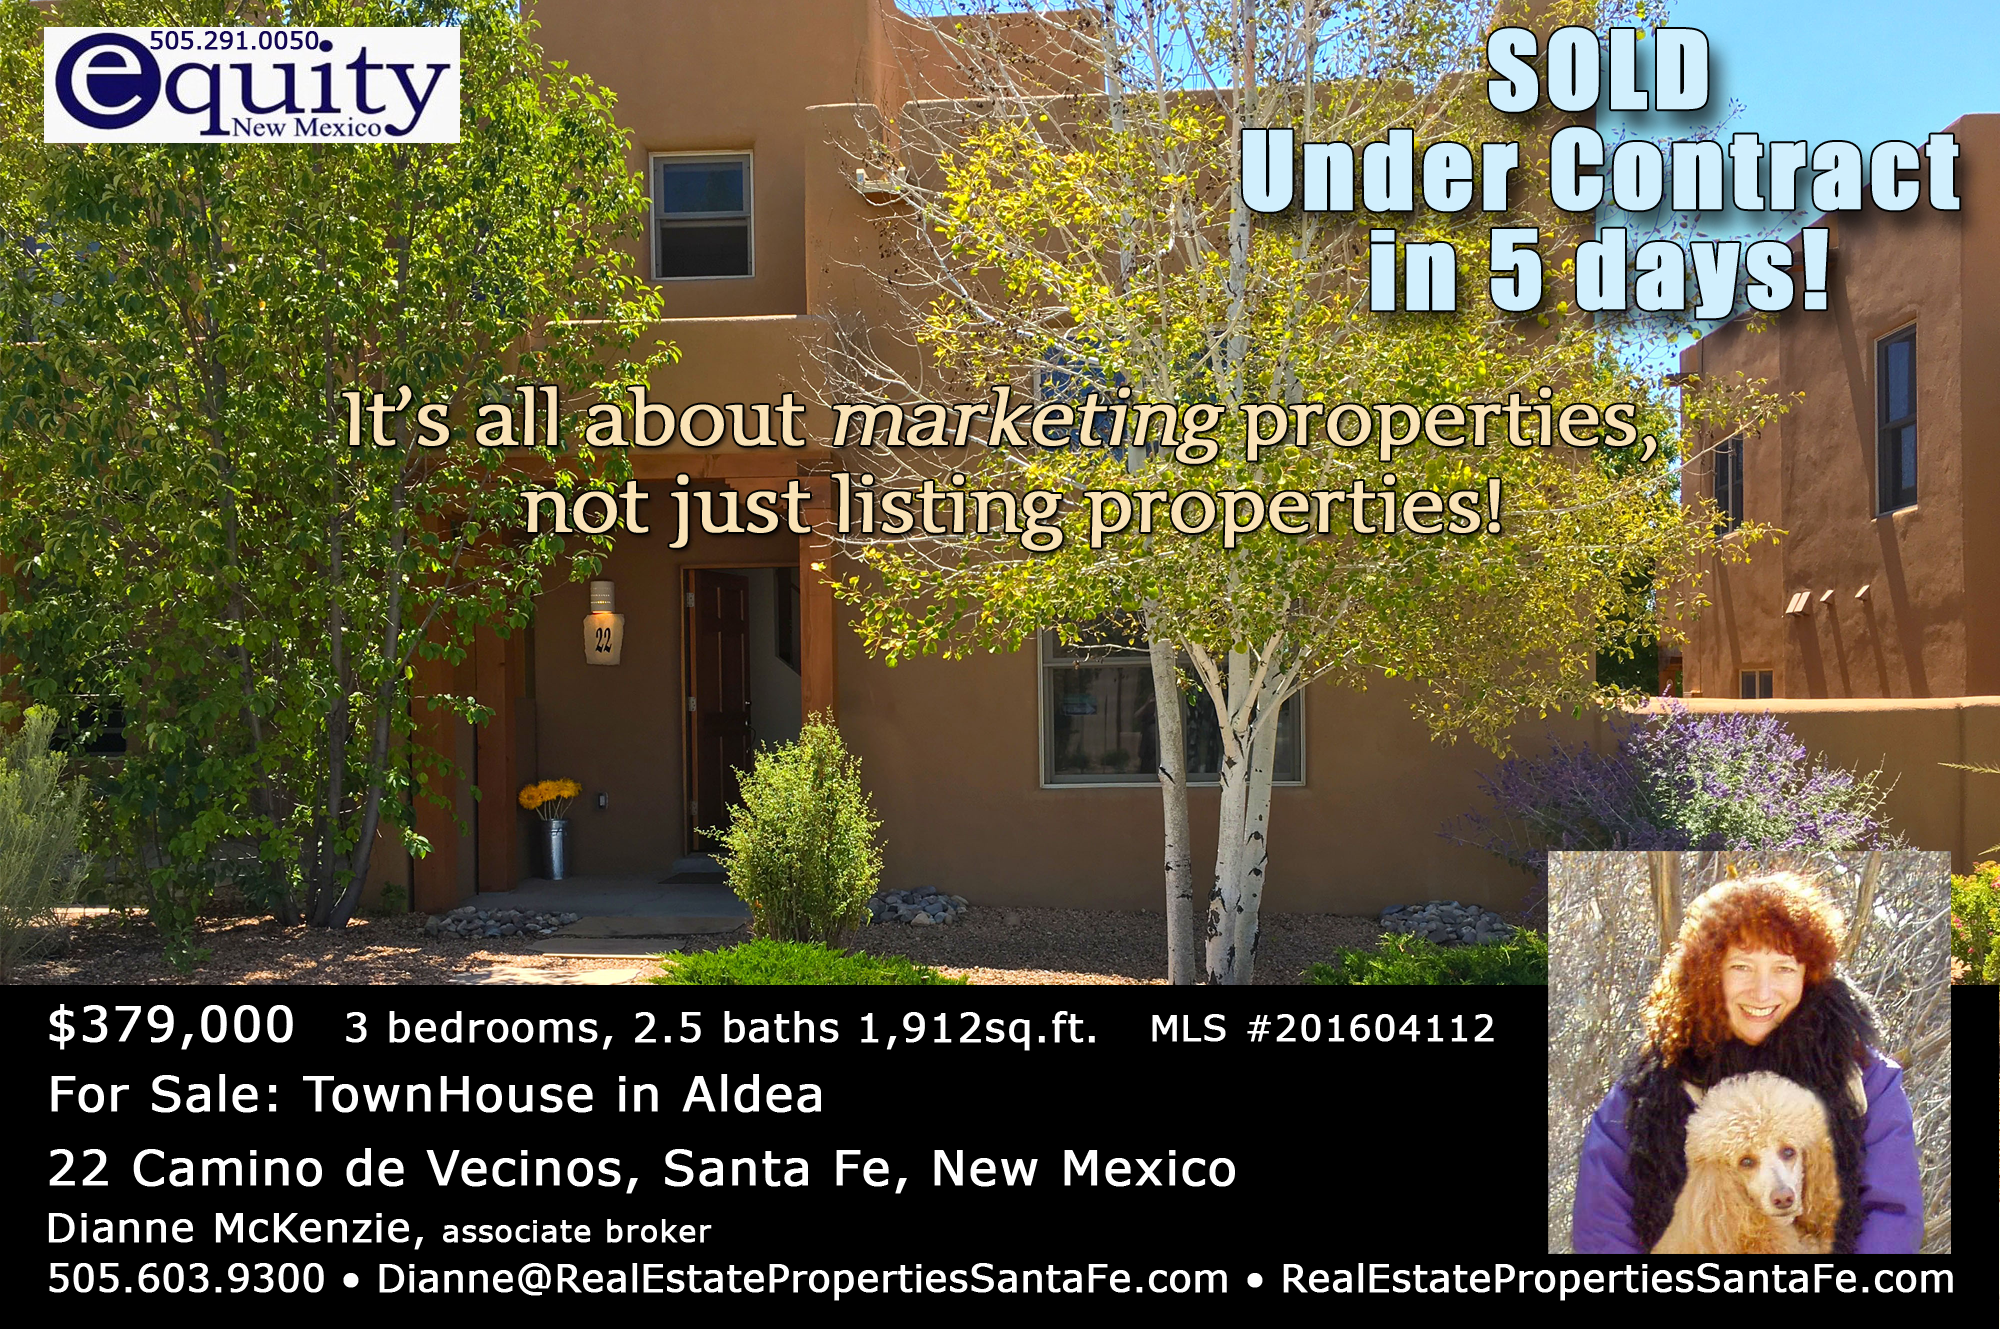 branded-images-for-listings_22-cam-de-vecinos-sold